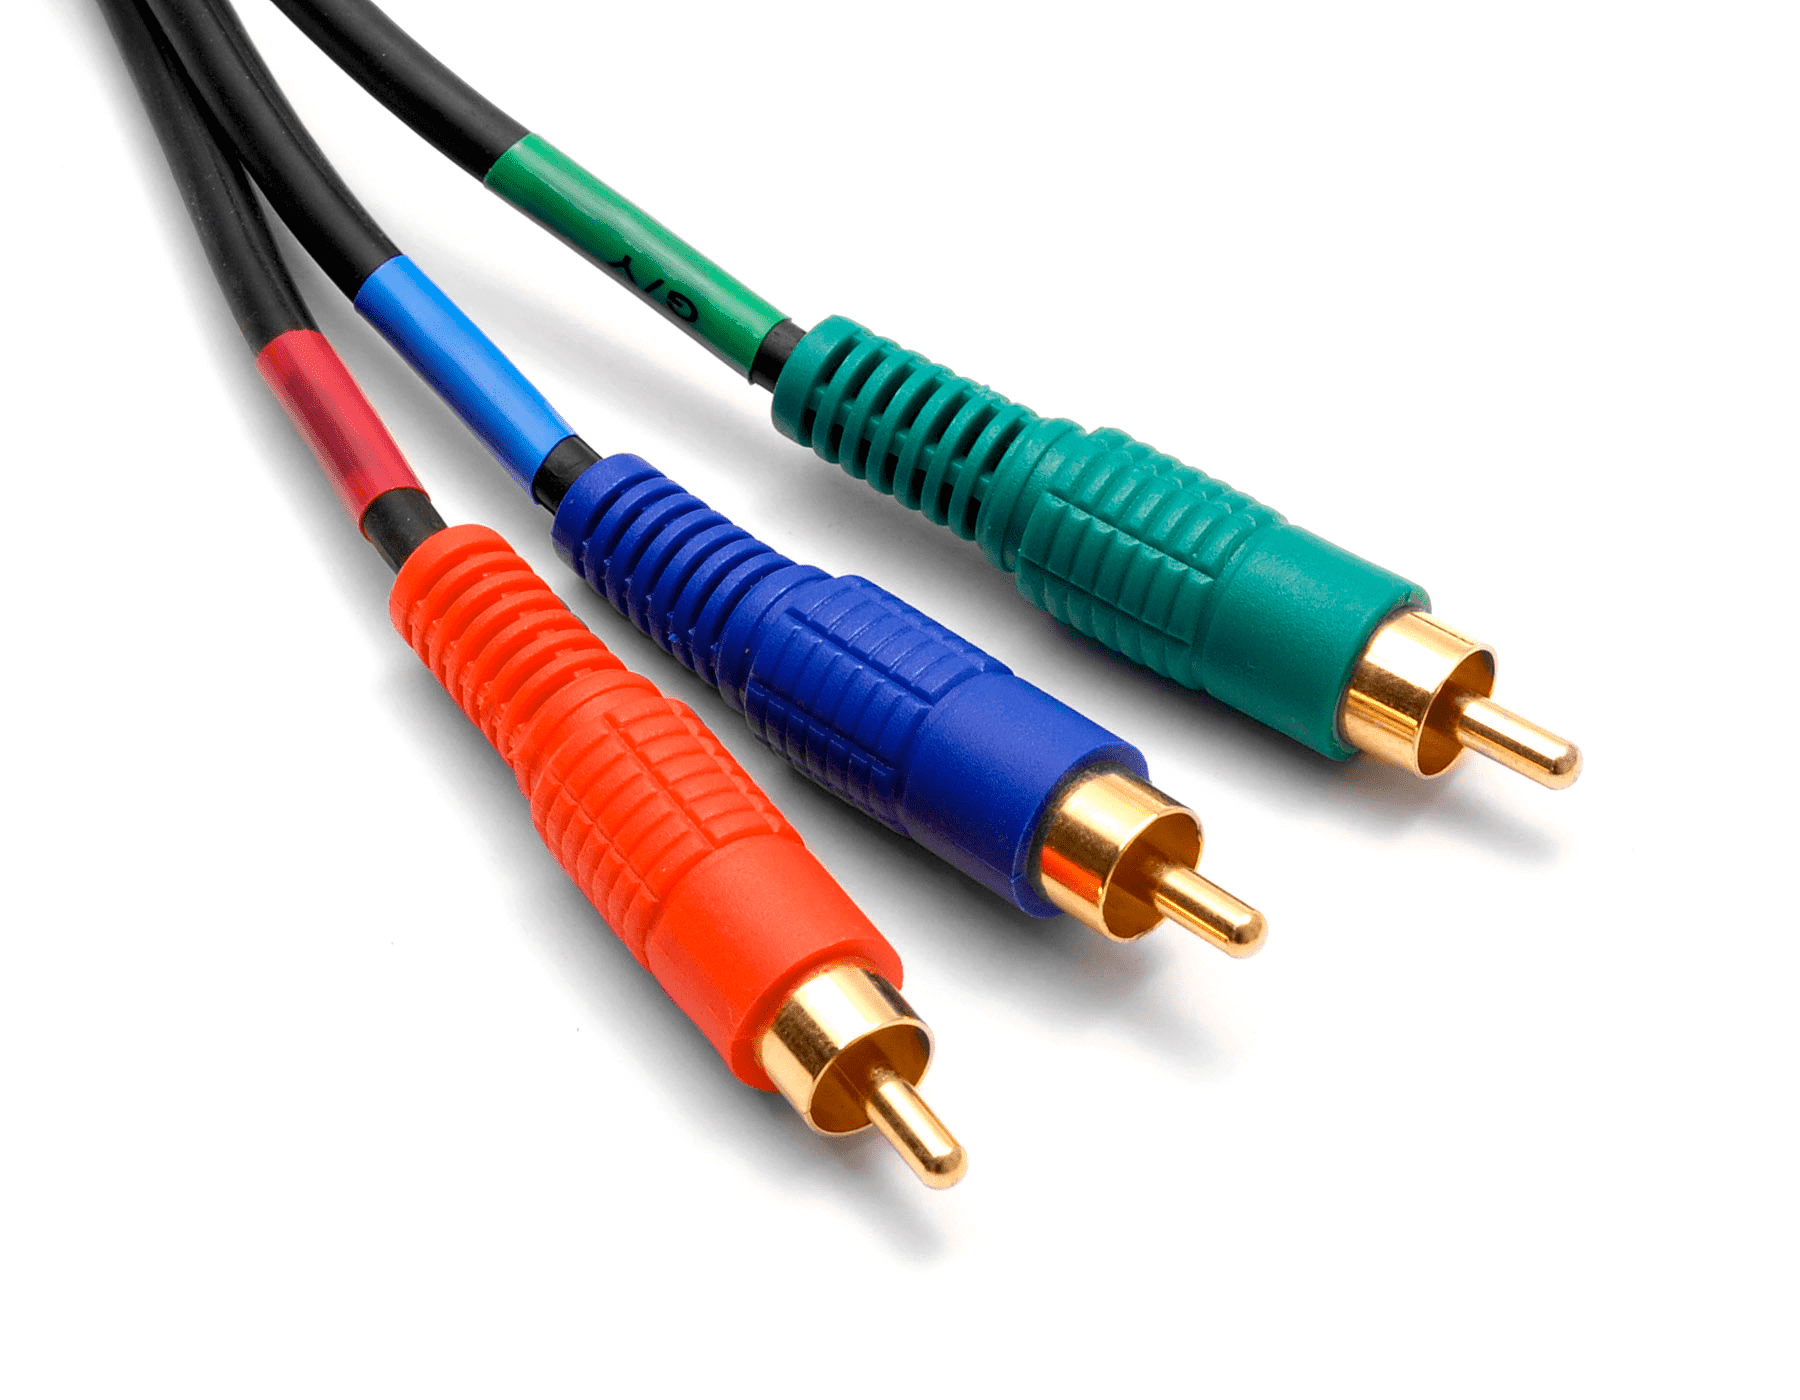 YPbPR cables.